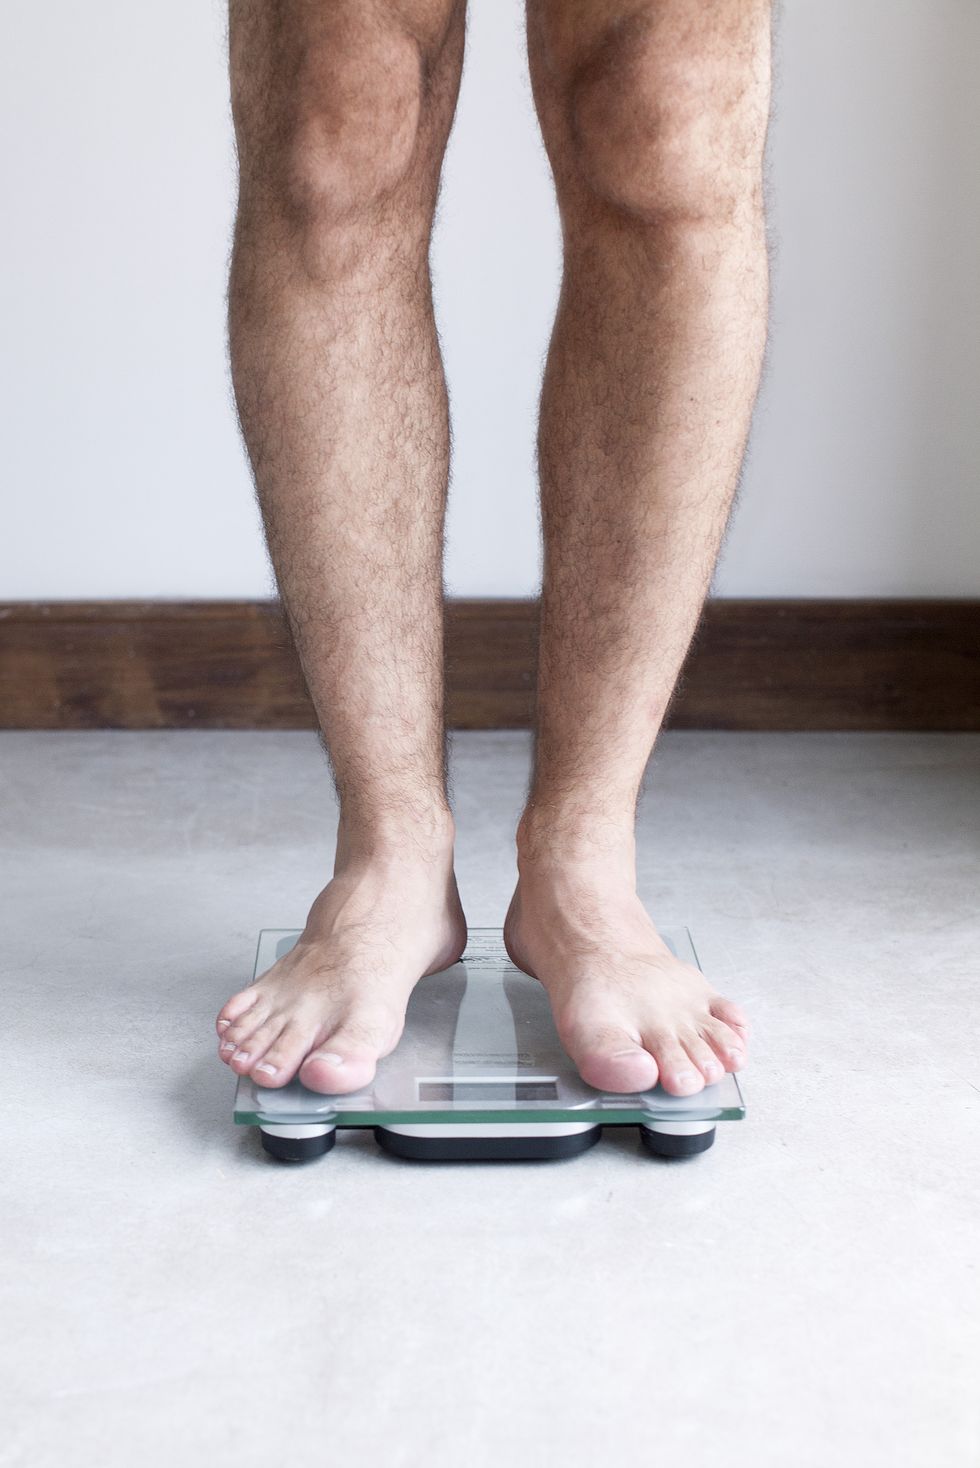 Do Body Fat Scales Work?